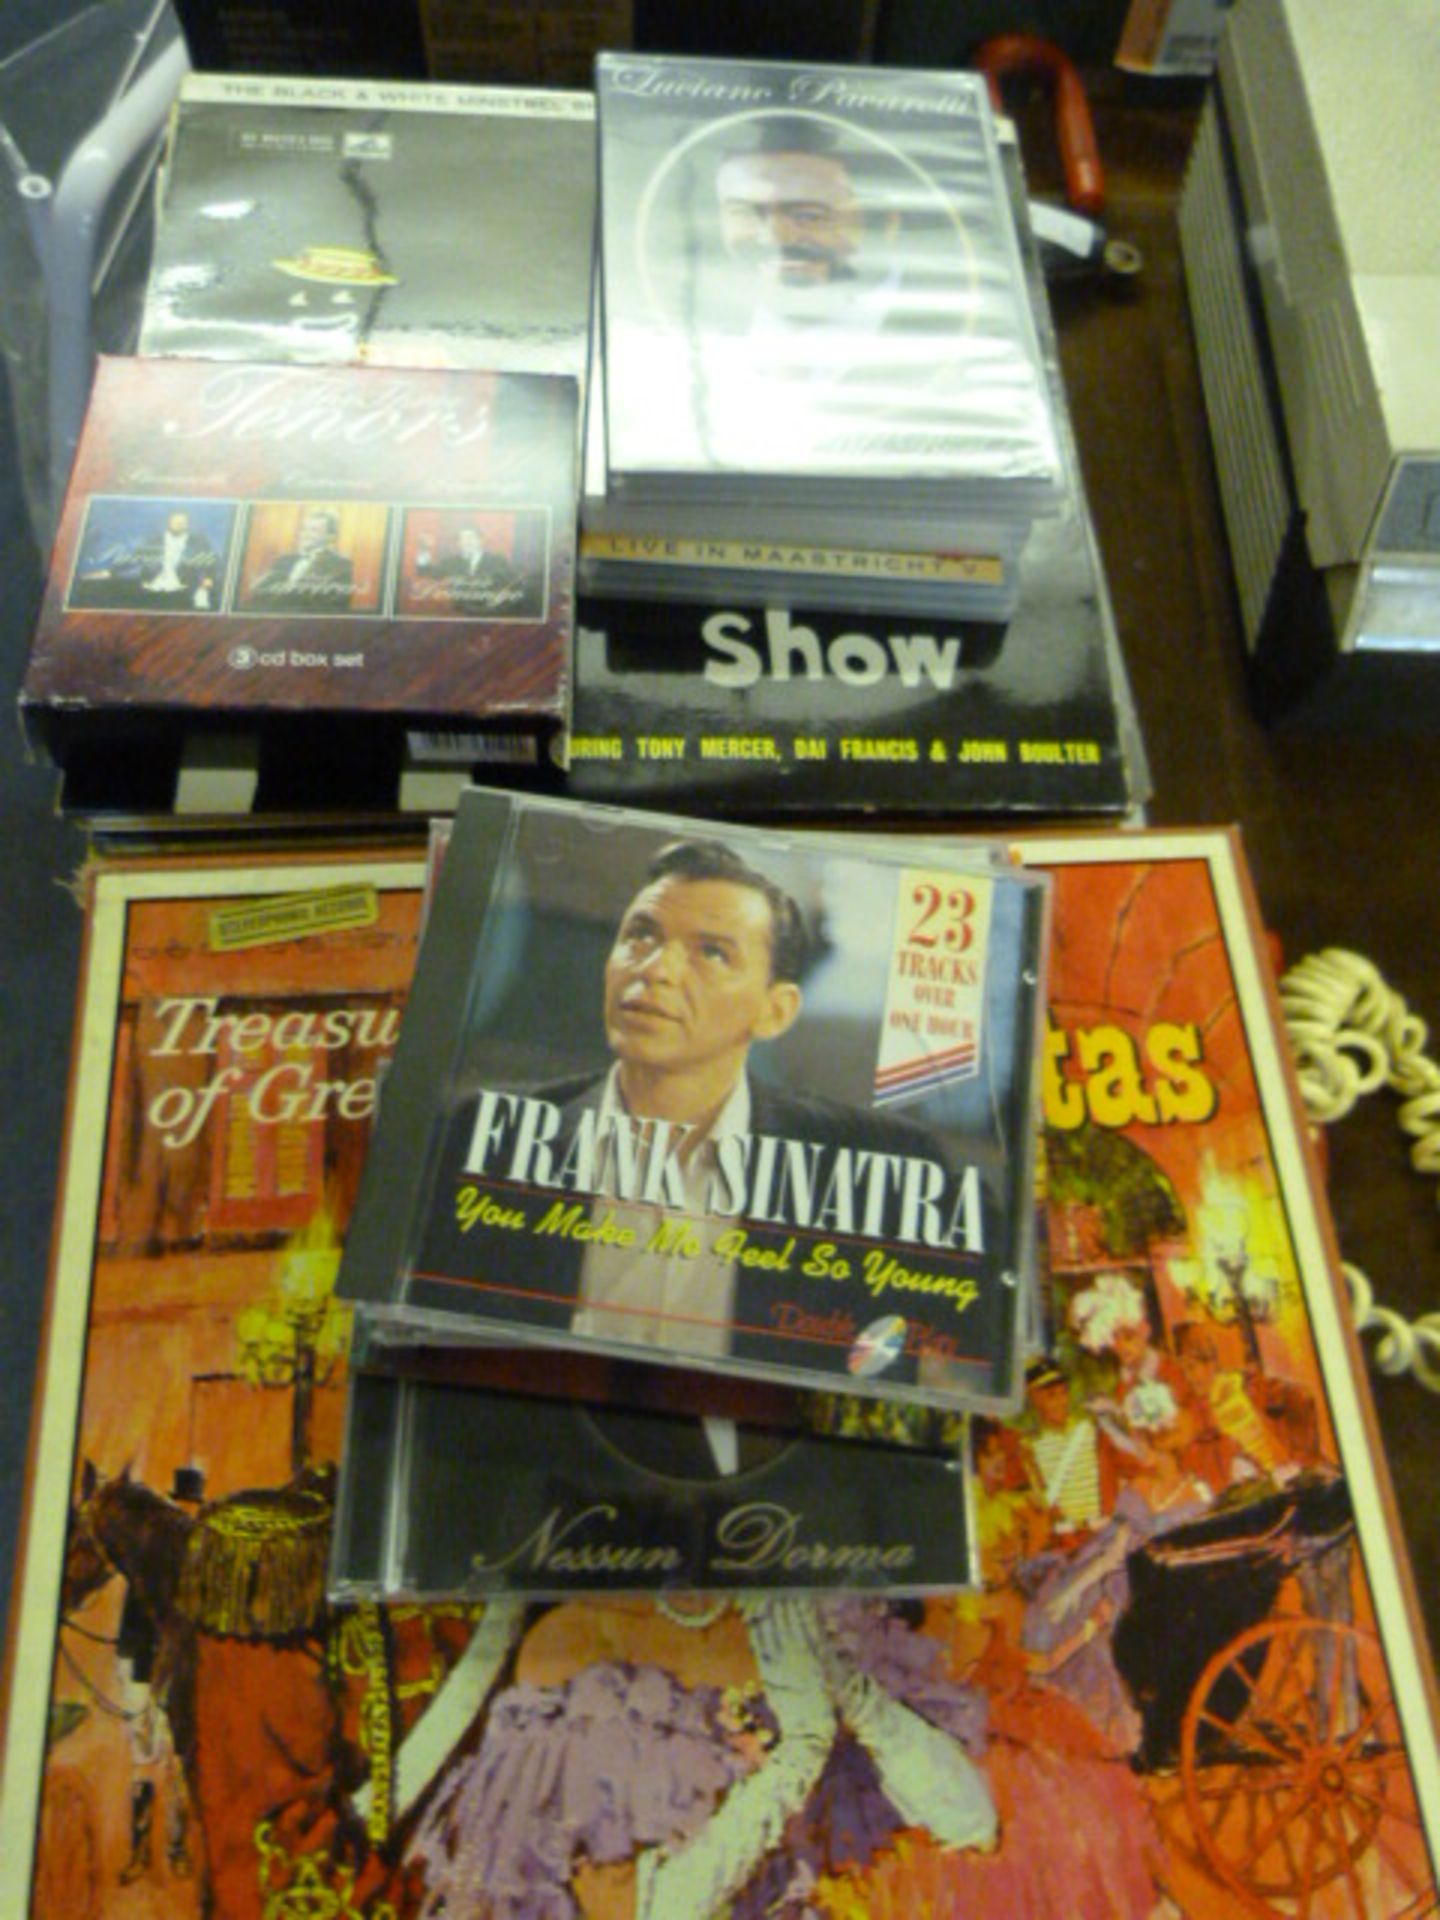 Collection of LP Records, Box Sets, CD and DVDs